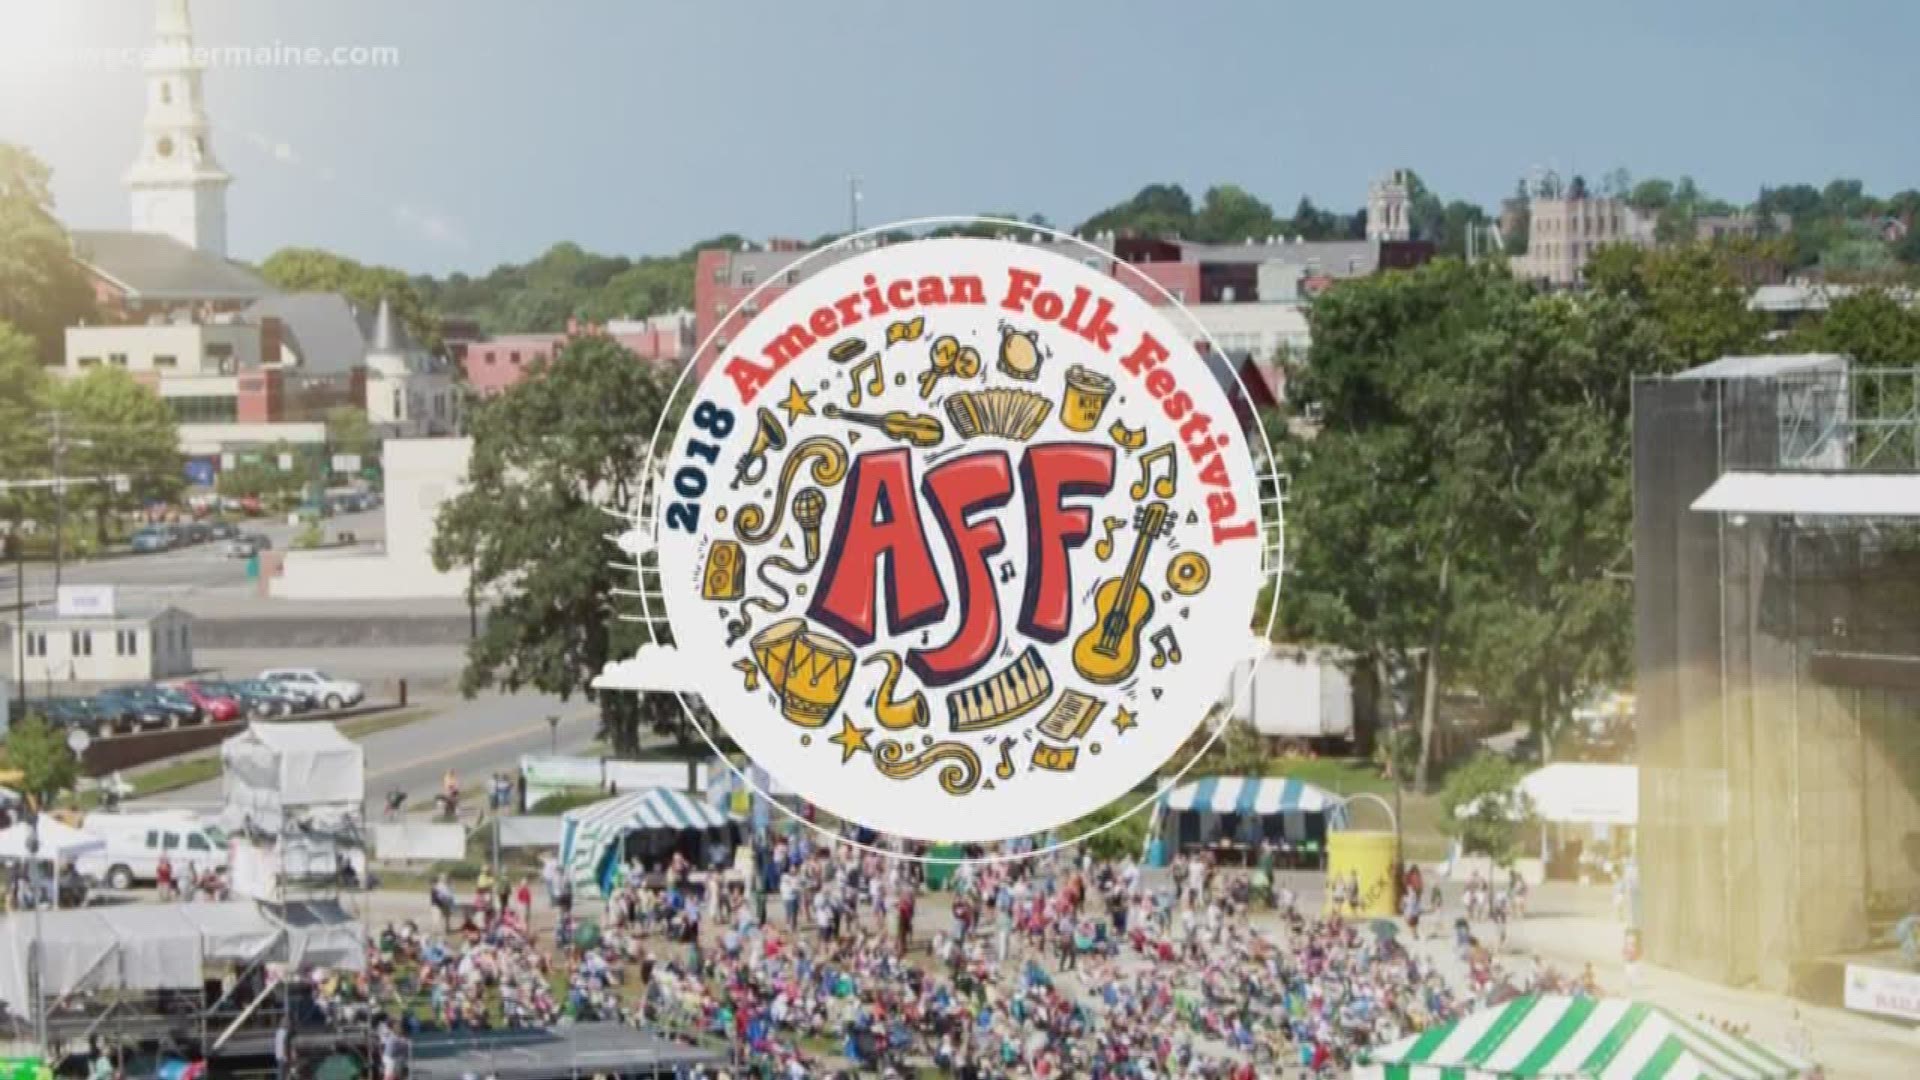 The annual American Folk Festival kicks off tonight in Bangor, and Cory has the details